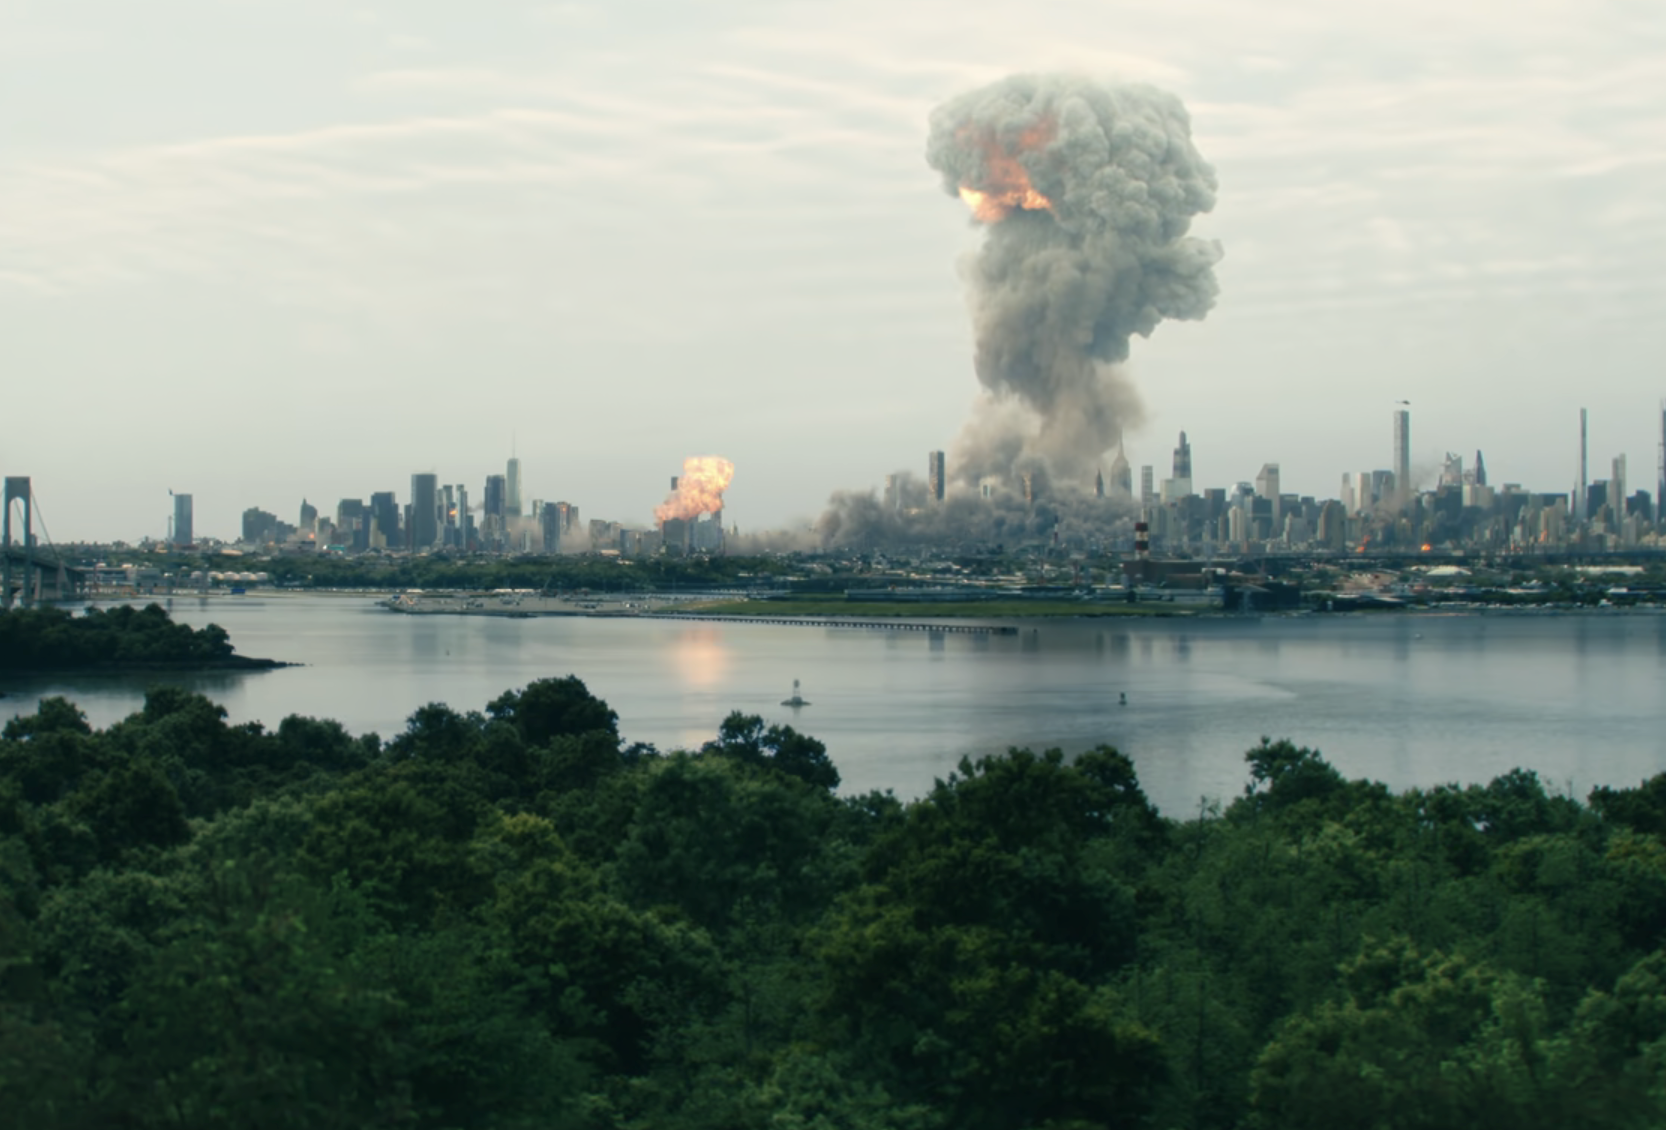 New York being bombed